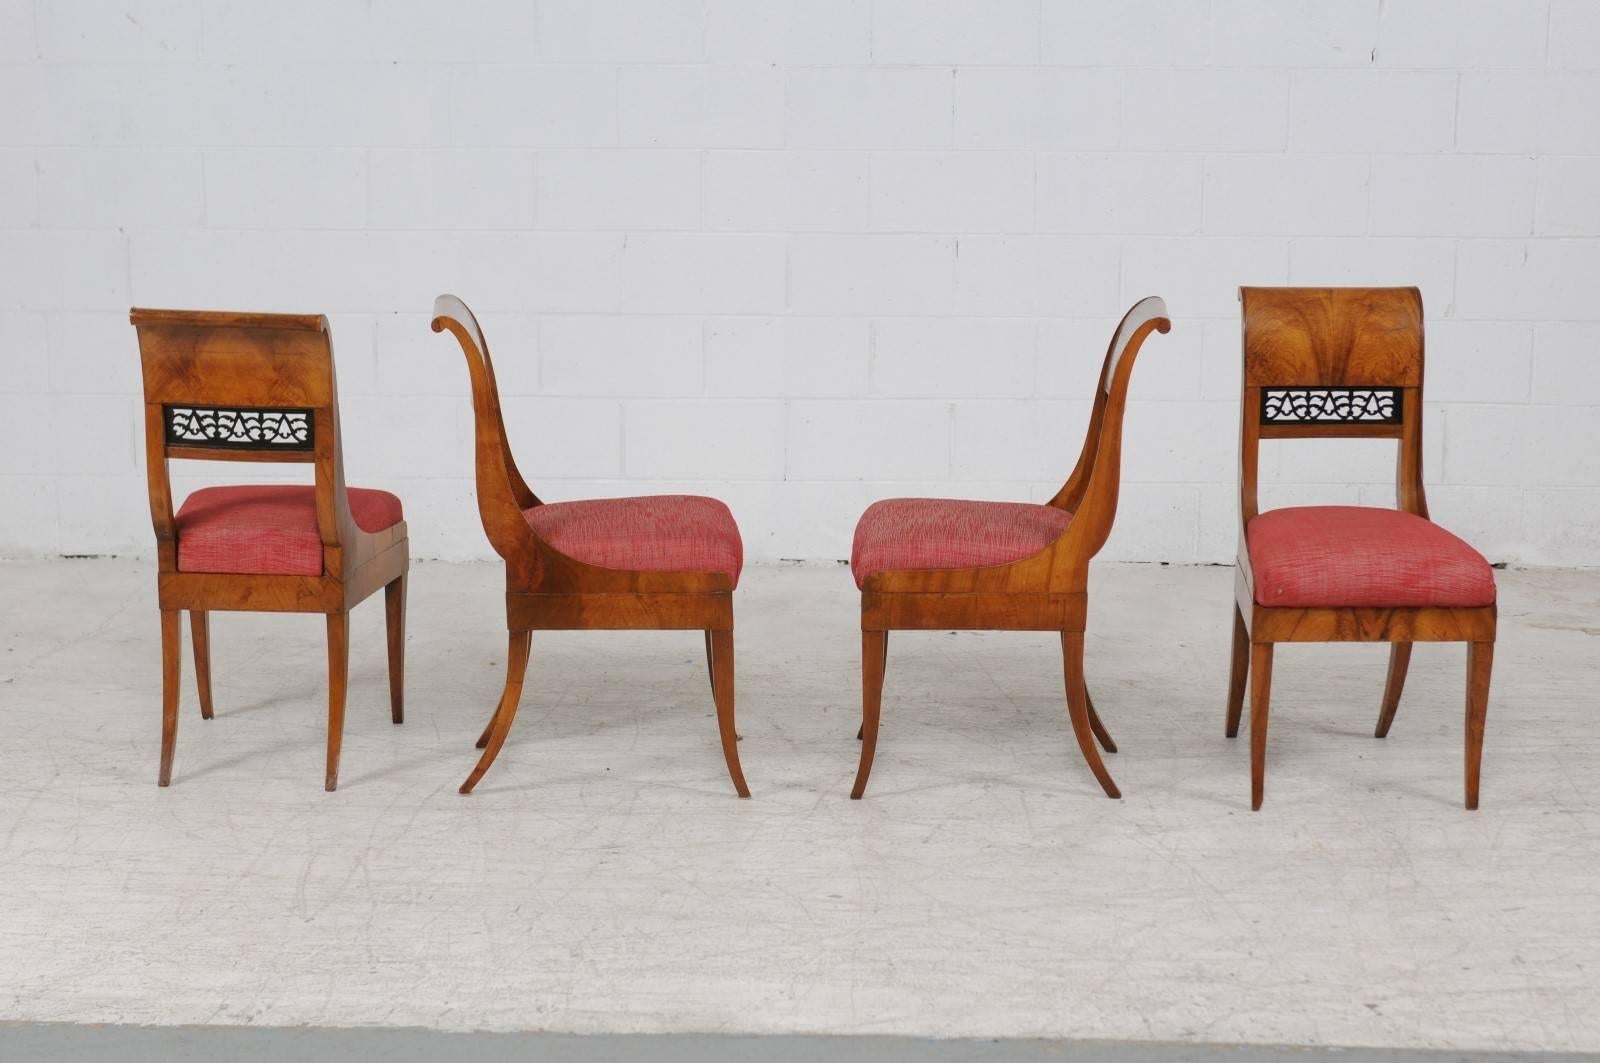 Set of Four 1840s Austrian Biedermeier Period Chairs with Bookmarked Veneer For Sale 2